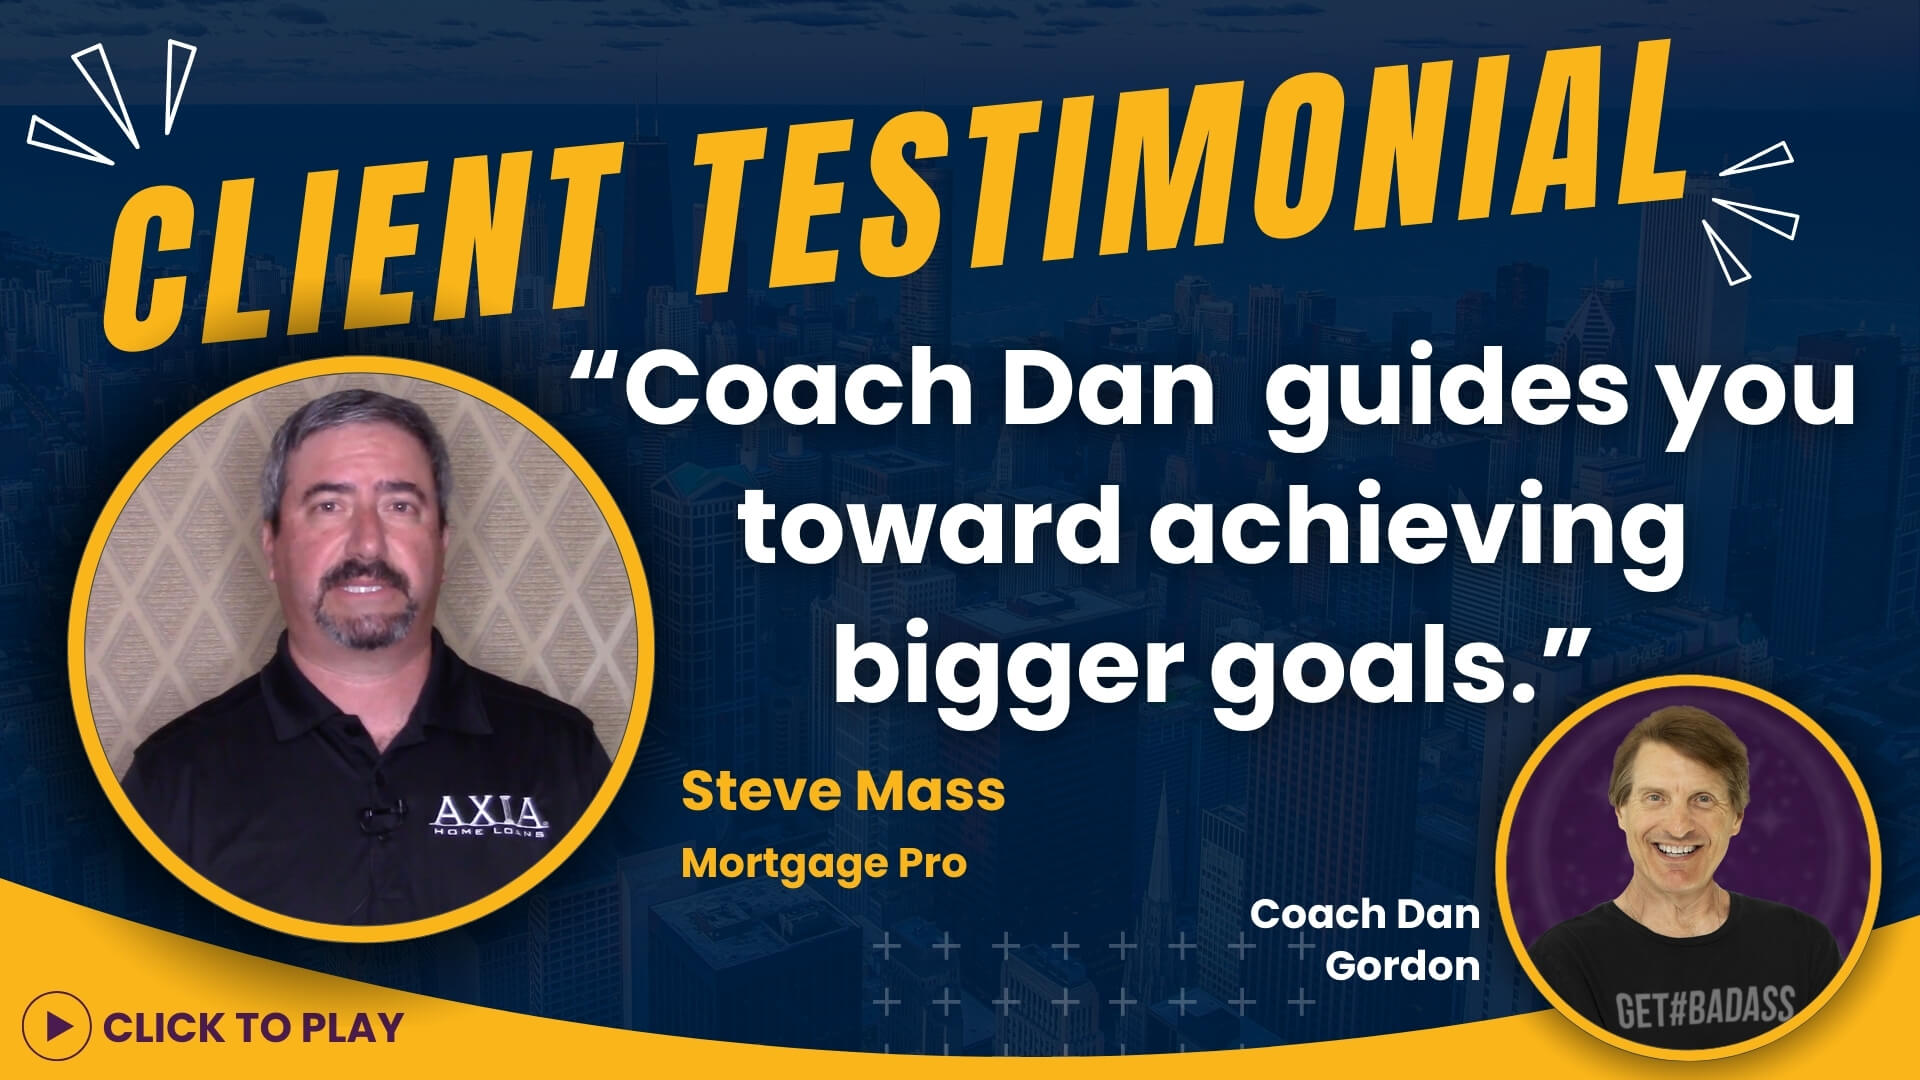 Mortgage Professional Steve Mass shares his experience with Coach Dan Gordon, emphasizing leadership and goal achievement.